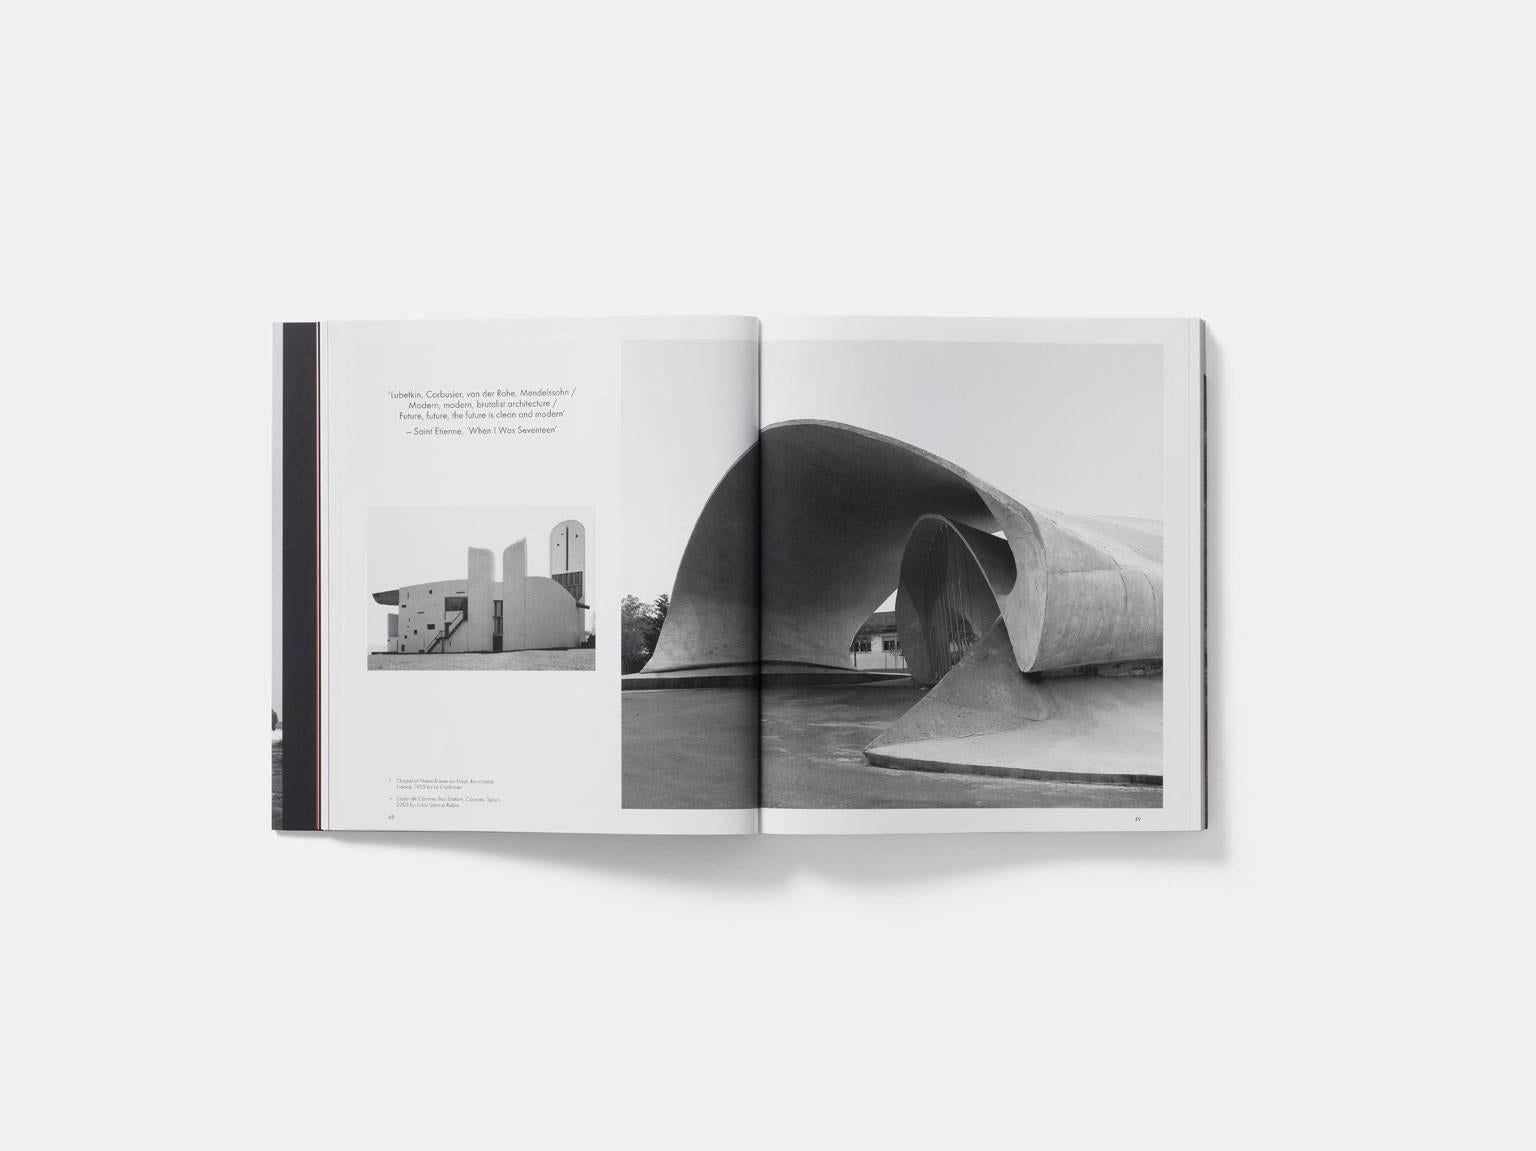 A curated collection of some of the most powerful and awe-inspiring Brutalist architecture ever built

This Brutal World is a global survey of this compelling and much-admired style of architecture. It brings to light virtually unknown Brutalist